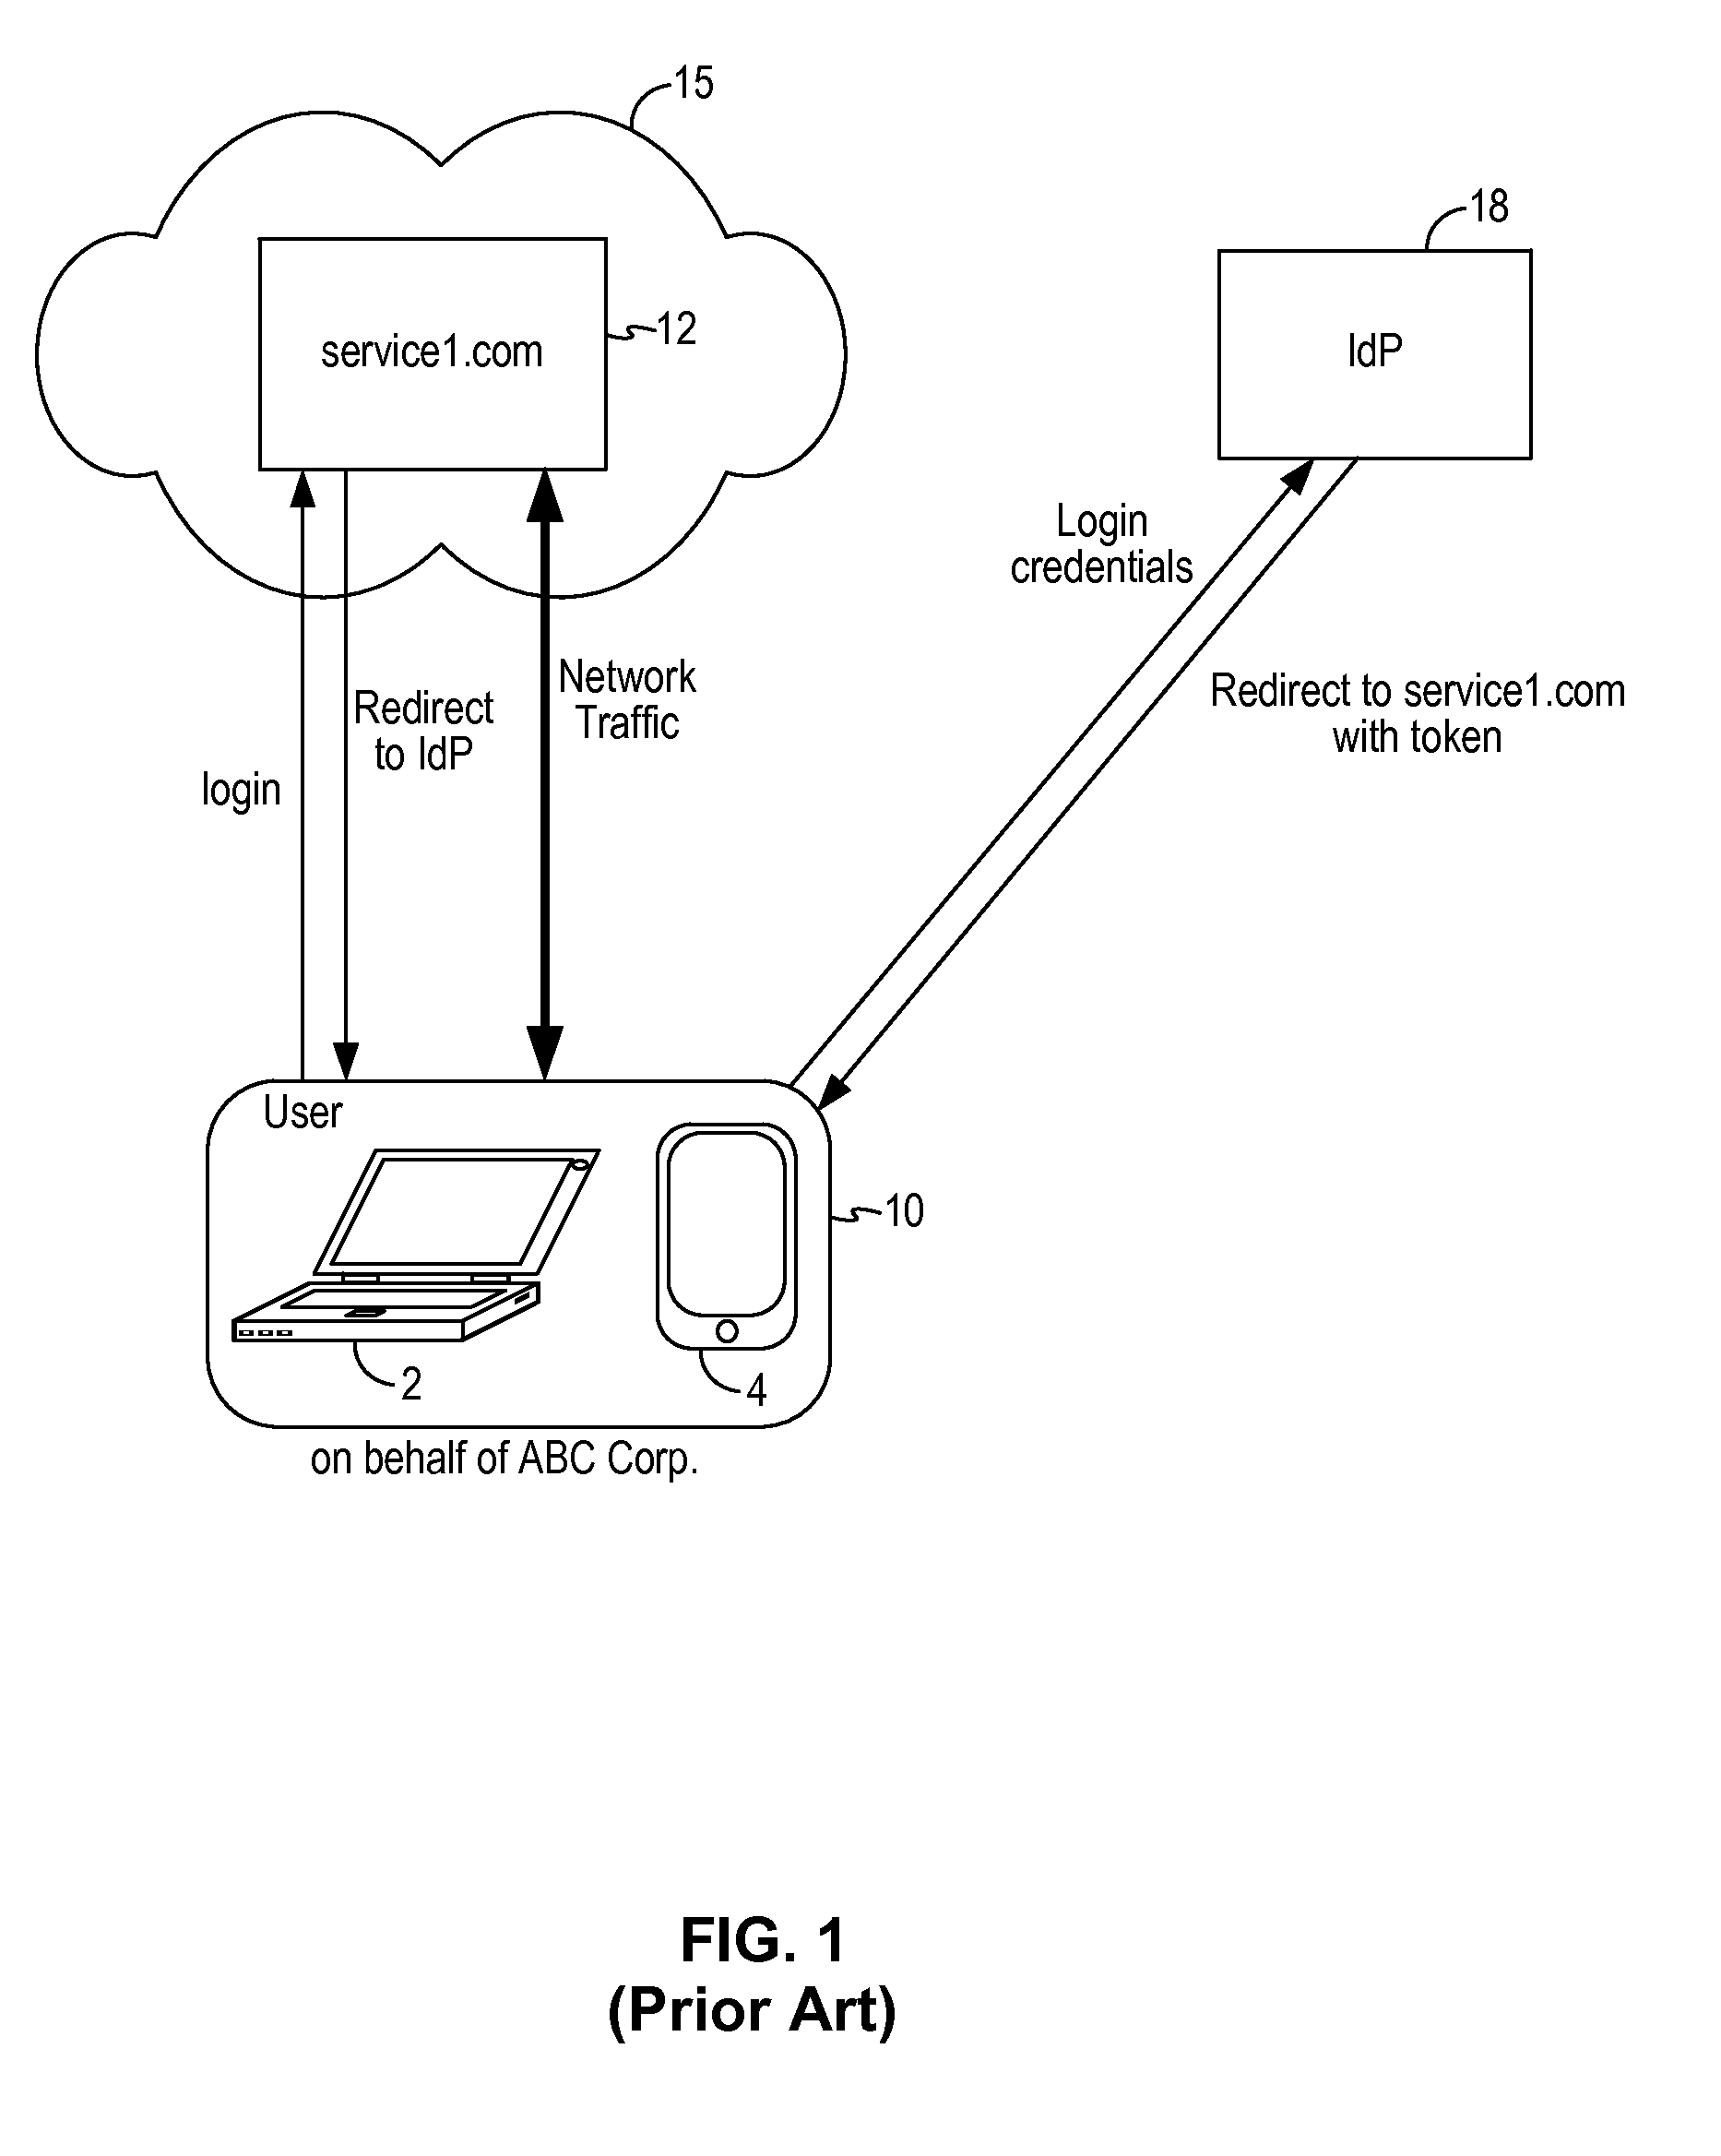 Network traffic monitoring system and method to redirect network traffic through a network intermediary